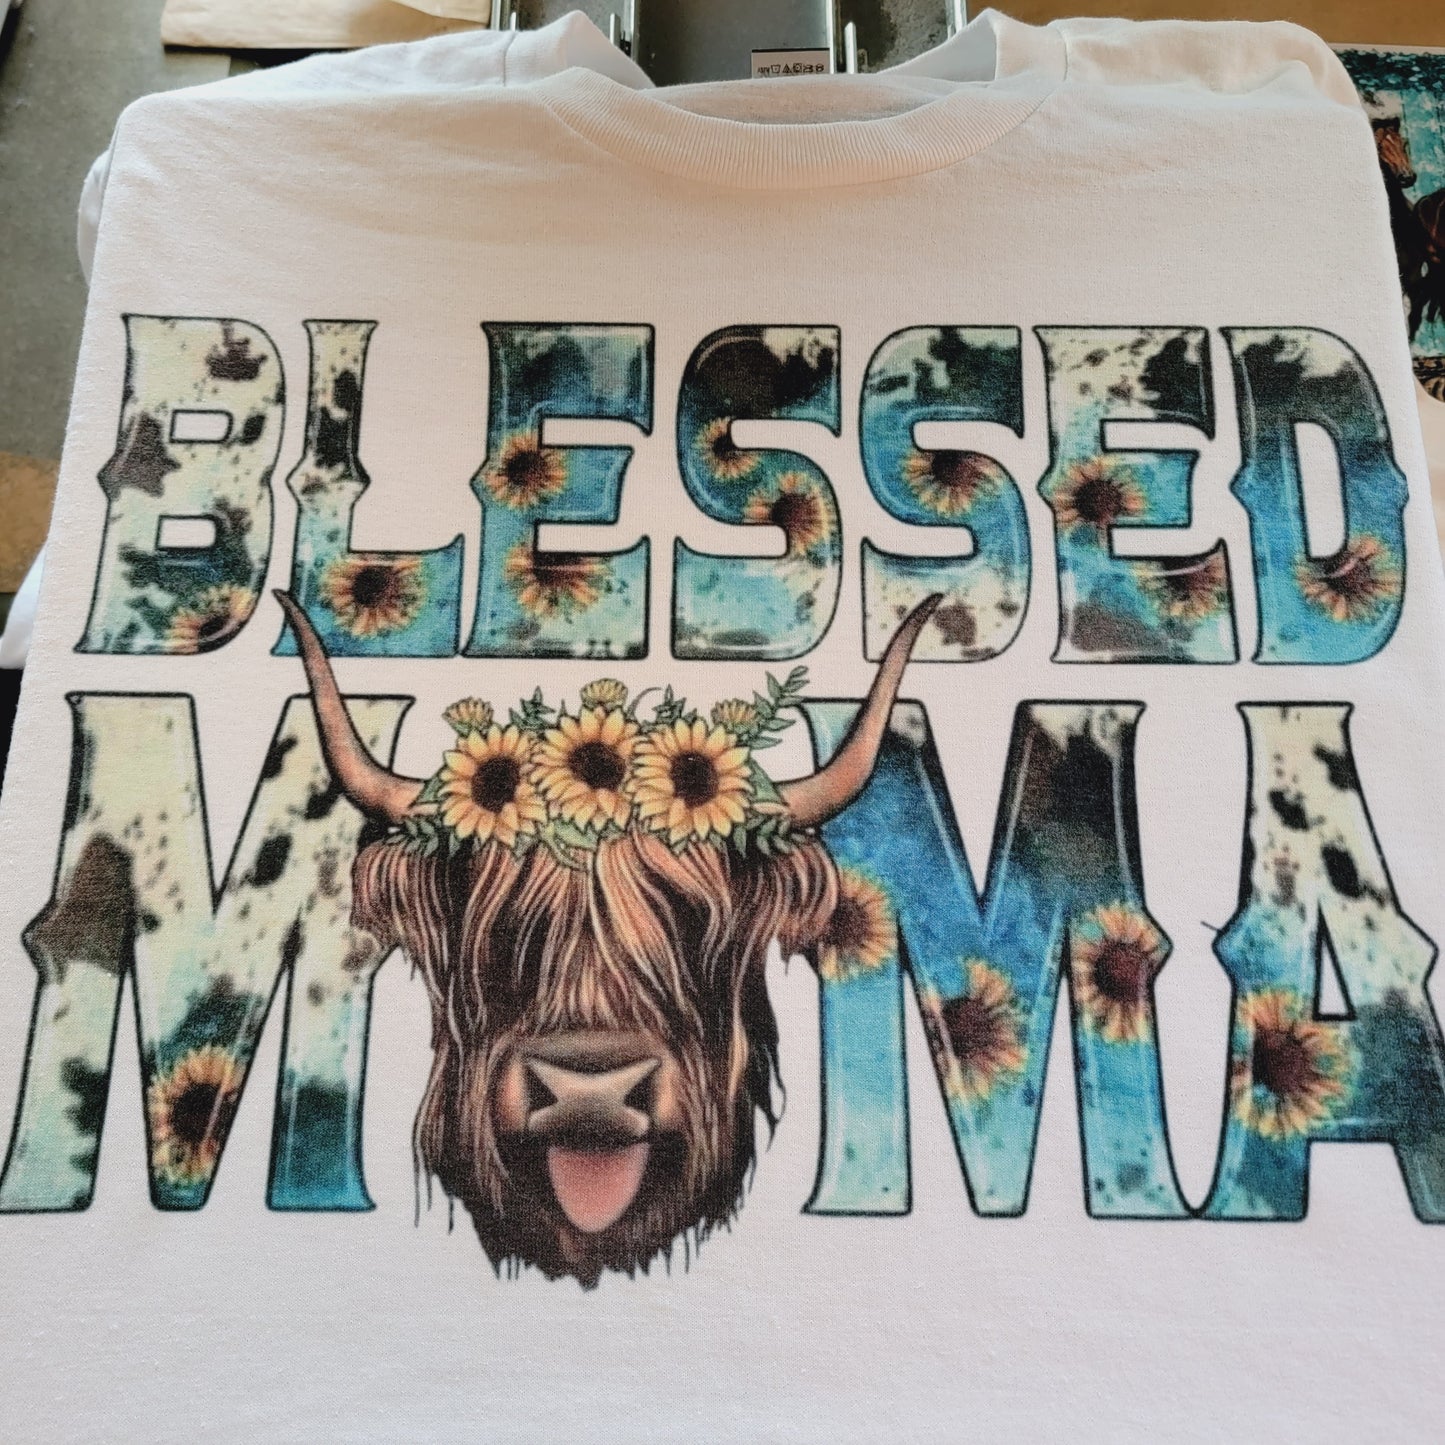 Blessed Mama Highland Cow Graphic T-Shirt